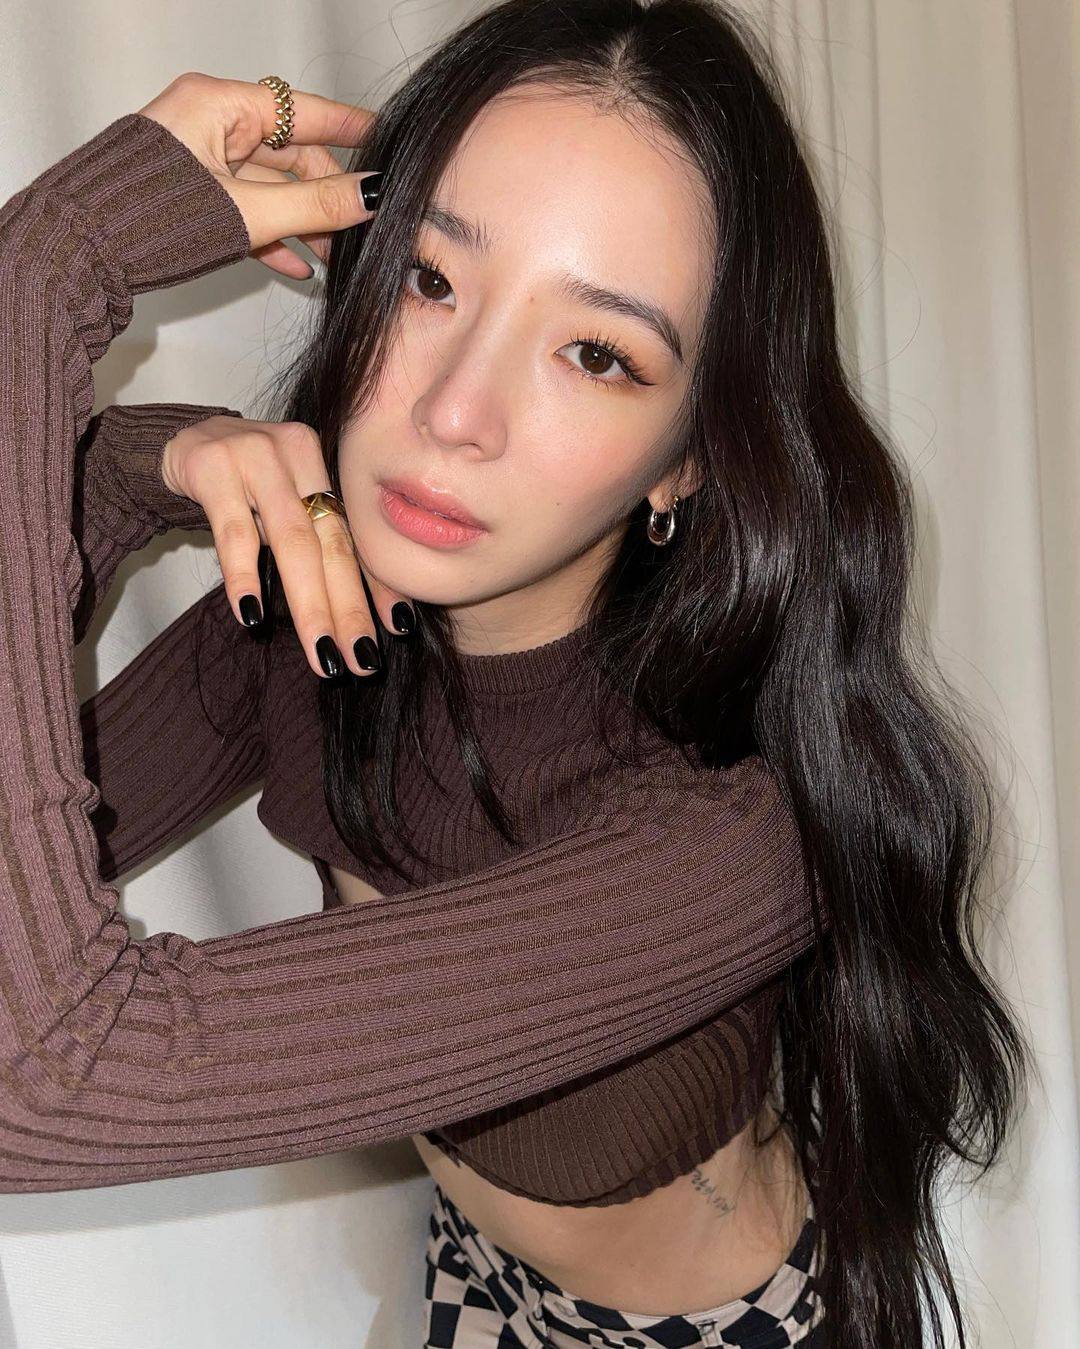 Meet Model Irene Kim, Bts' J-Hope'S Rumoured Girlfriend: The  Korean-American Fashion 'It' Girl Is Pals With Blackpink'S Jennie And Red  Velvet'S Joy â€“ And Models For EstÃ©e Lauder With Kendall Jenner |